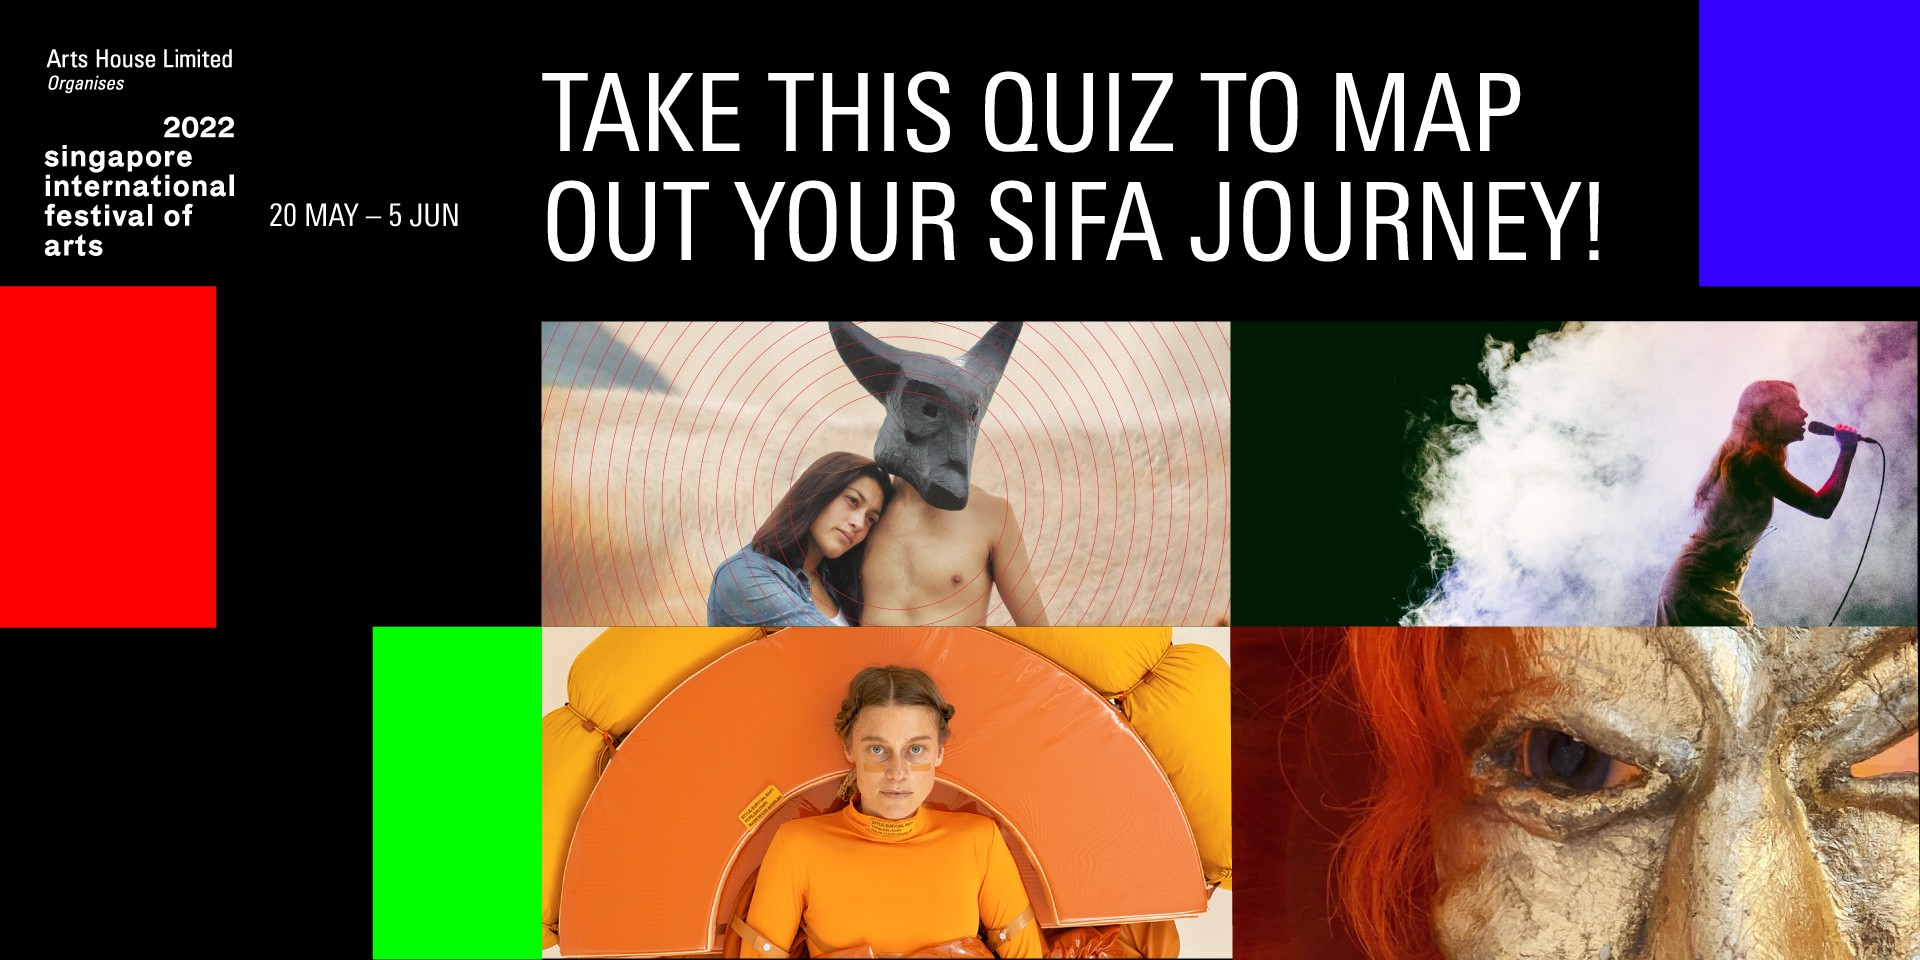 Plan your art adventure through SIFA 2022 - Take this quiz to map out your journey!